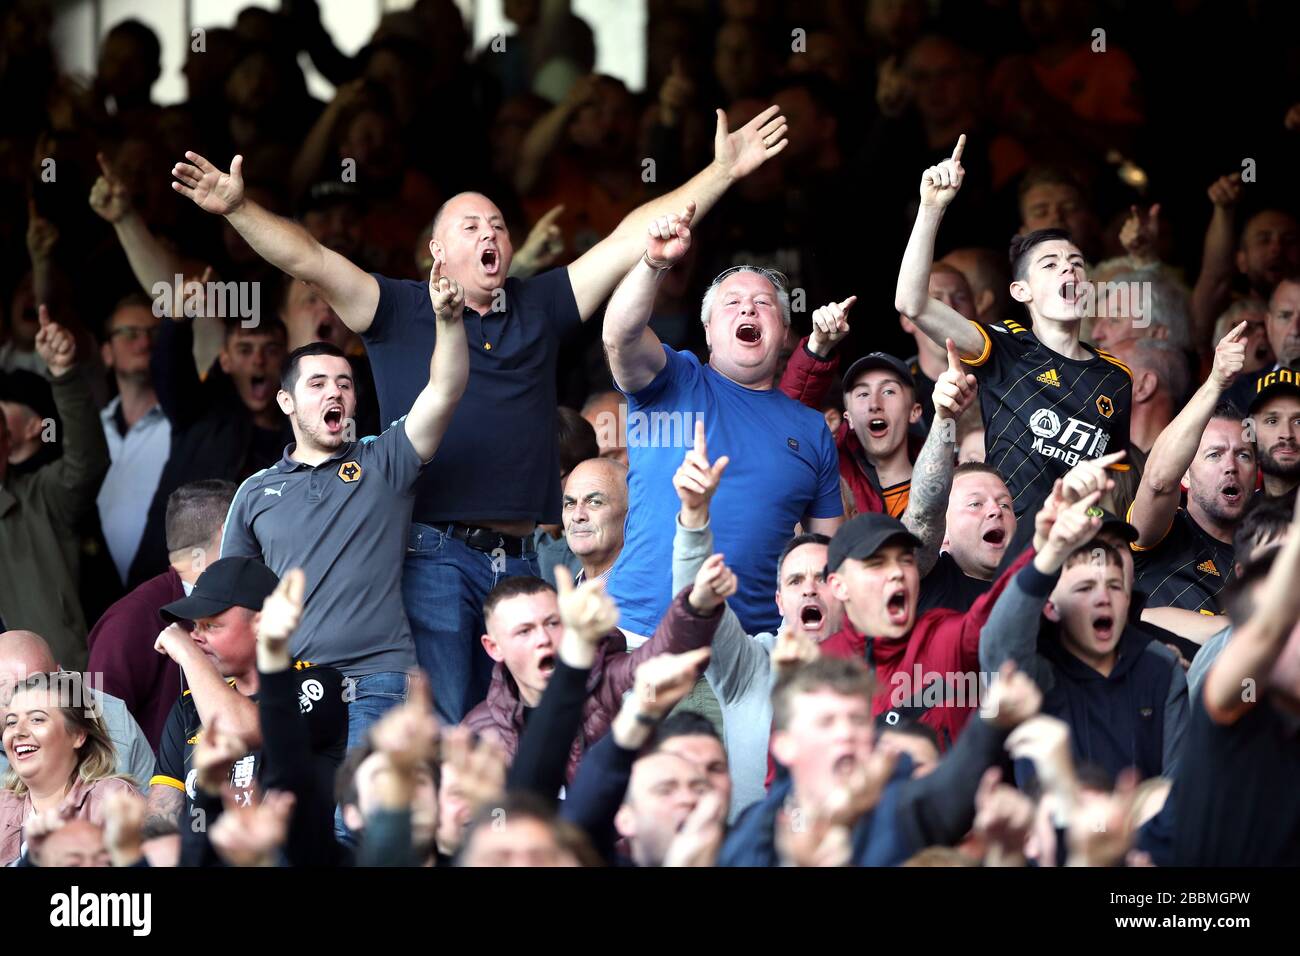 Wolverhampton Wanders fans celebrate their side's first goal of the game, scored by Romain Saiss (not pictured) Stock Photo